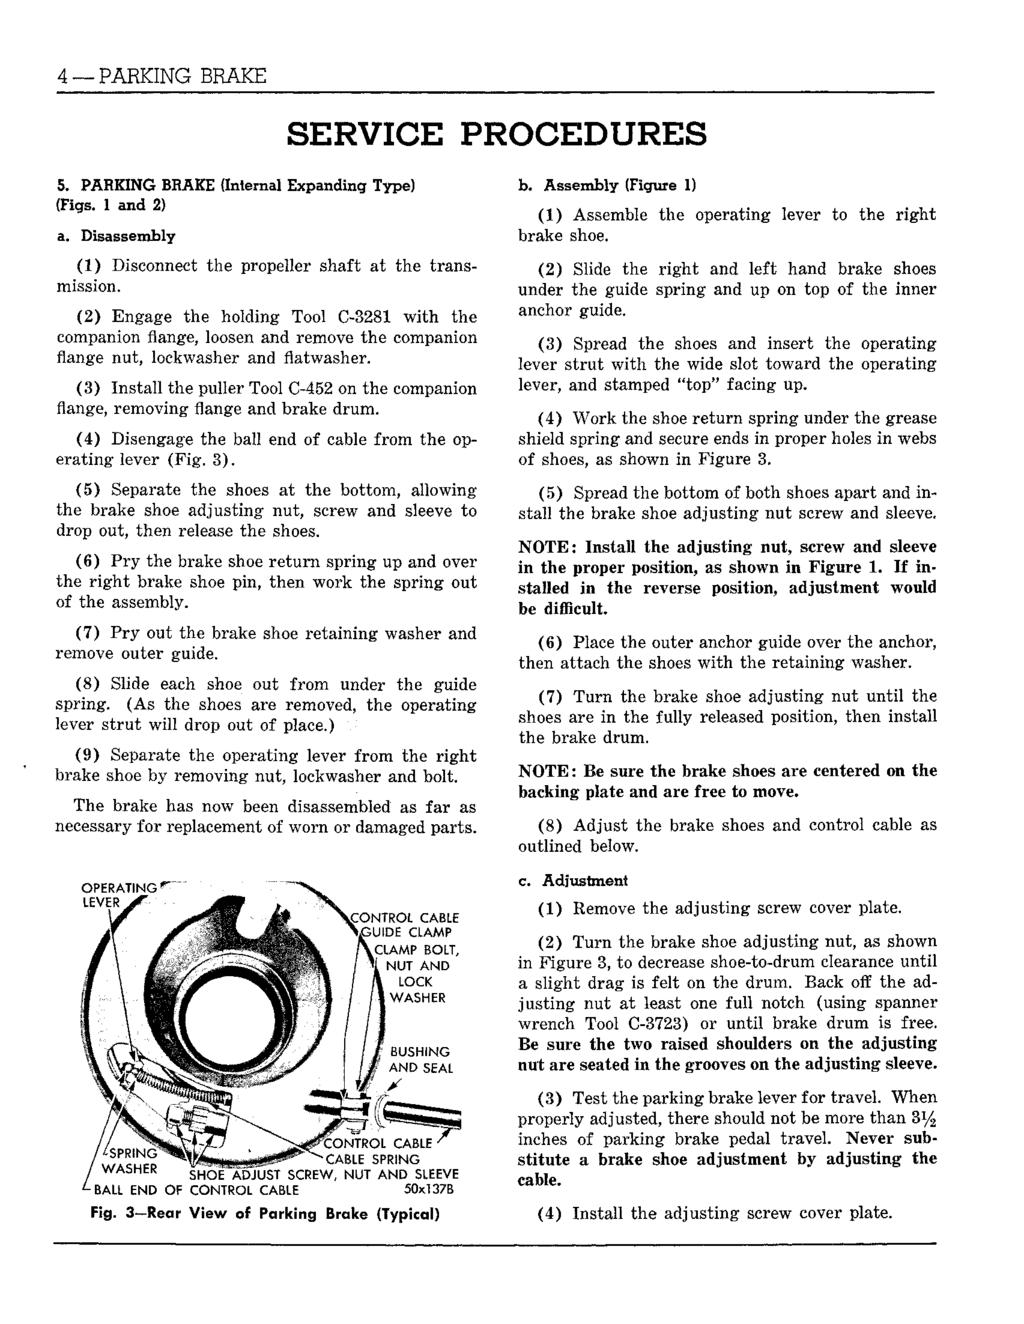 4 PARKING BRAKE SERVICE PROCEDURES 5. PARKING BRAKE (Internal Expanding Type) (Figs, 1 and 2) a. Disassembly (1) Disconnect the propeller shaft at the transmission.